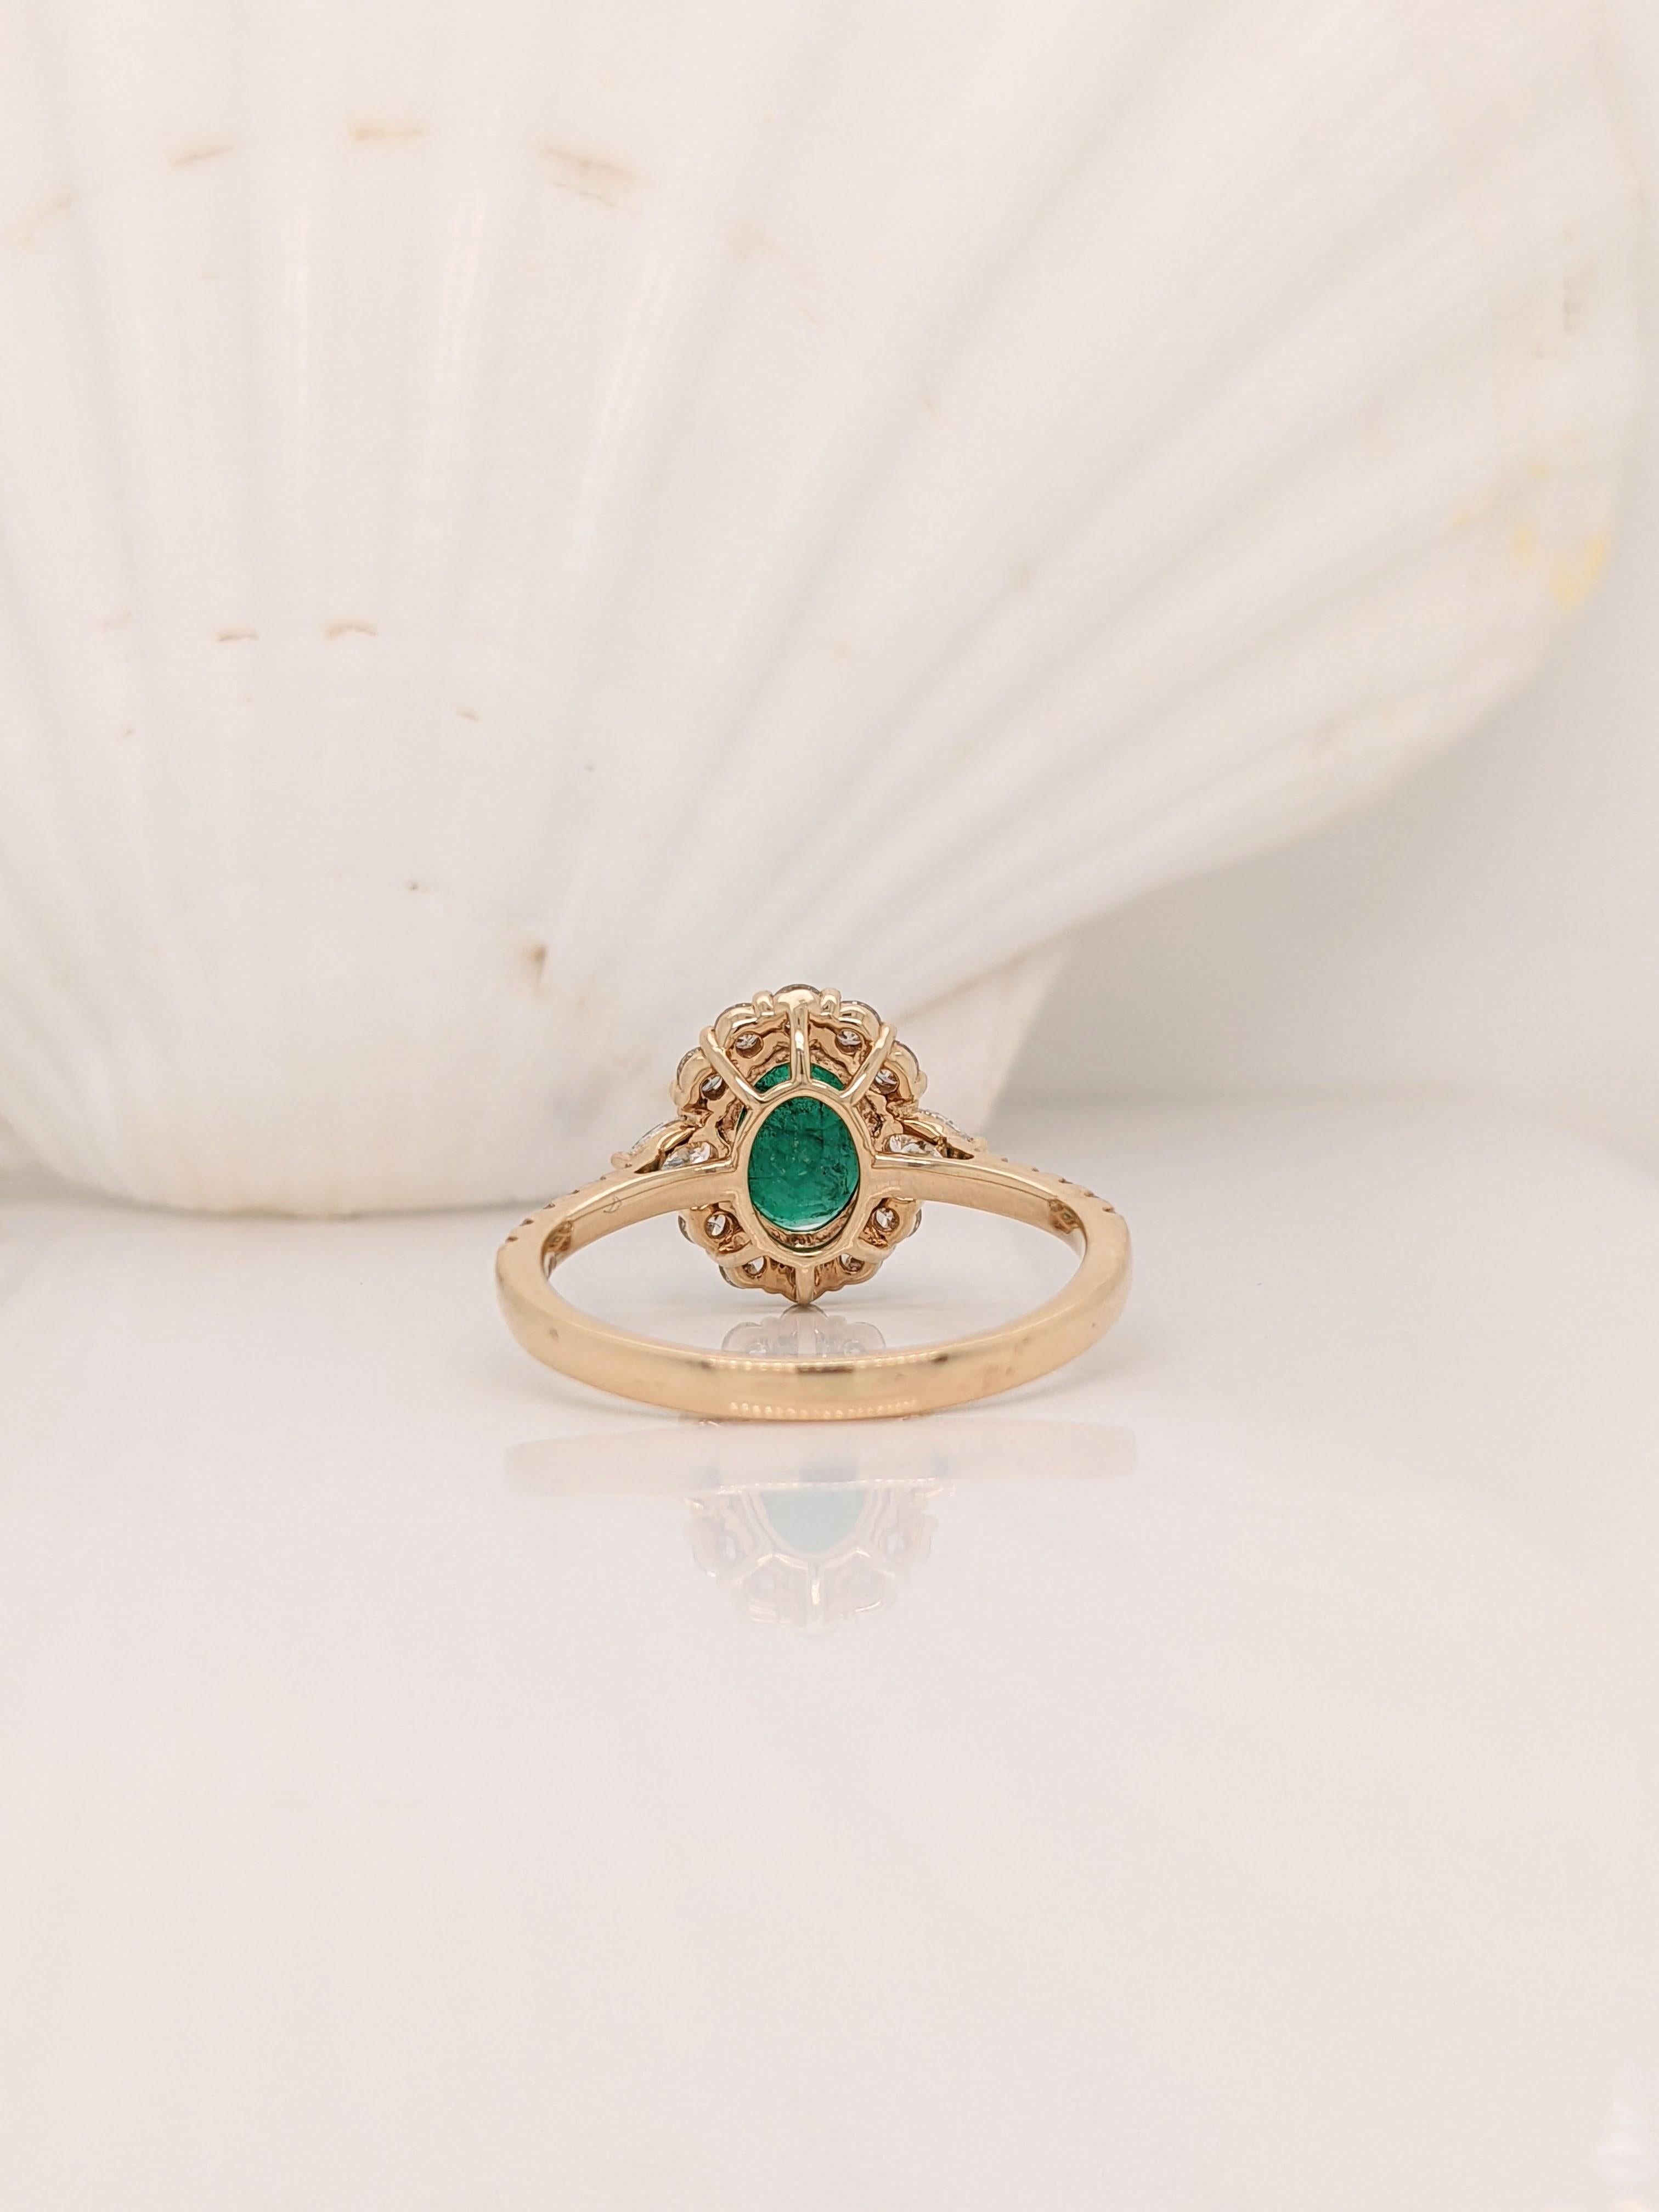 Oval Cut 1.25ct Emerald Ring w Diamond Halo & Pear Diamond Accents in 14k Gold Oval 8x6mm